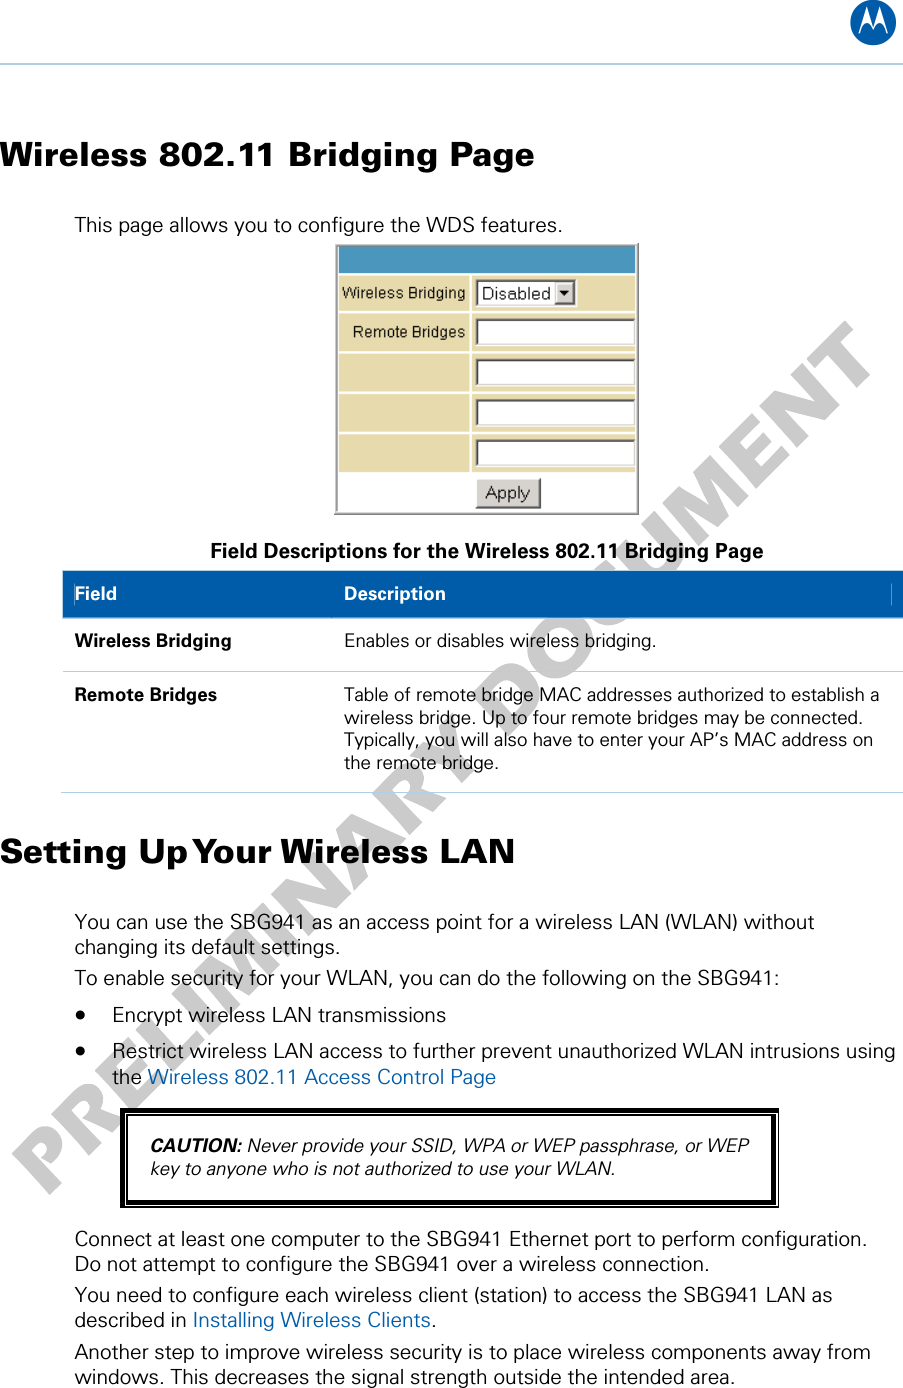 B Wireless 802.11 Bridging Page This page allows you to configure the WDS features.  Field Descriptions for the Wireless 802.11 Bridging Page Field   Description Wireless Bridging  Enables or disables wireless bridging. Remote Bridges  Table of remote bridge MAC addresses authorized to establish a wireless bridge. Up to four remote bridges may be connected. Typically, you will also have to enter your AP’s MAC address on the remote bridge. Setting Up Your Wireless LAN You can use the SBG941 as an access point for a wireless LAN (WLAN) without changing its default settings. To enable security for your WLAN, you can do the following on the SBG941: • Encrypt wireless LAN transmissions  • Restrict wireless LAN access to further prevent unauthorized WLAN intrusions using the Wireless 802.11 Access Control Page CAUTION: Never provide your SSID, WPA or WEP passphrase, or WEP key to anyone who is not authorized to use your WLAN. Connect at least one computer to the SBG941 Ethernet port to perform configuration. Do not attempt to configure the SBG941 over a wireless connection. You need to configure each wireless client (station) to access the SBG941 LAN as described in Installing Wireless Clients. Another step to improve wireless security is to place wireless components away from windows. This decreases the signal strength outside the intended area. 10 • Wireless Pages 63   